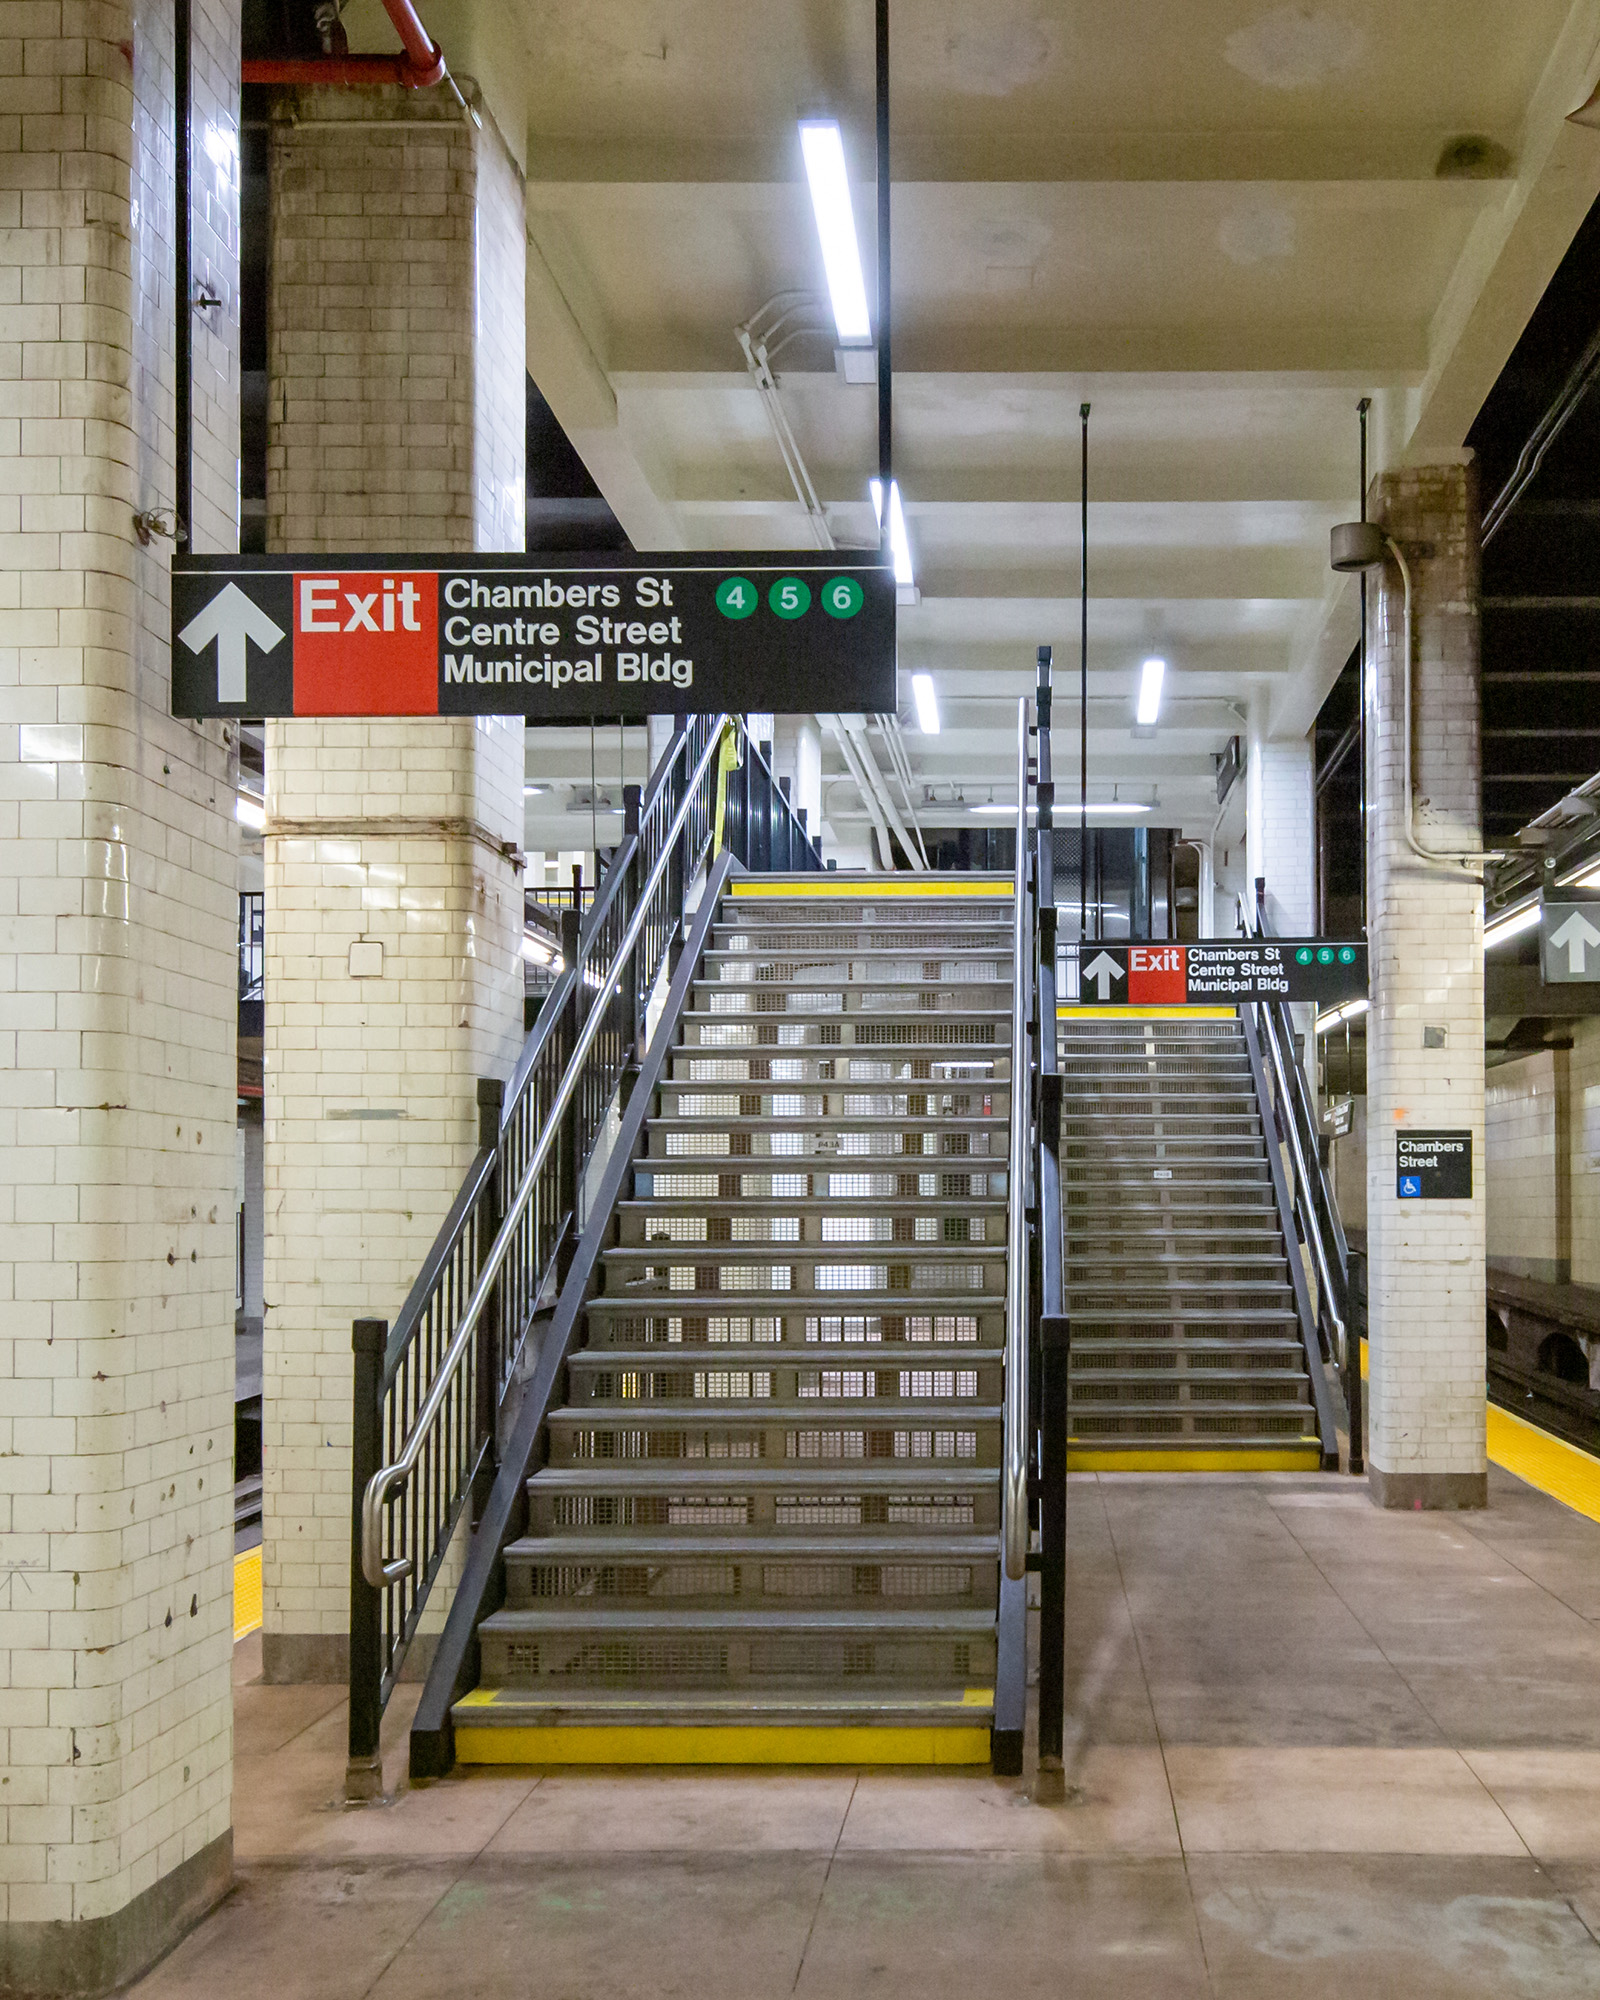 new staircases from the subway platform to station mezzanine